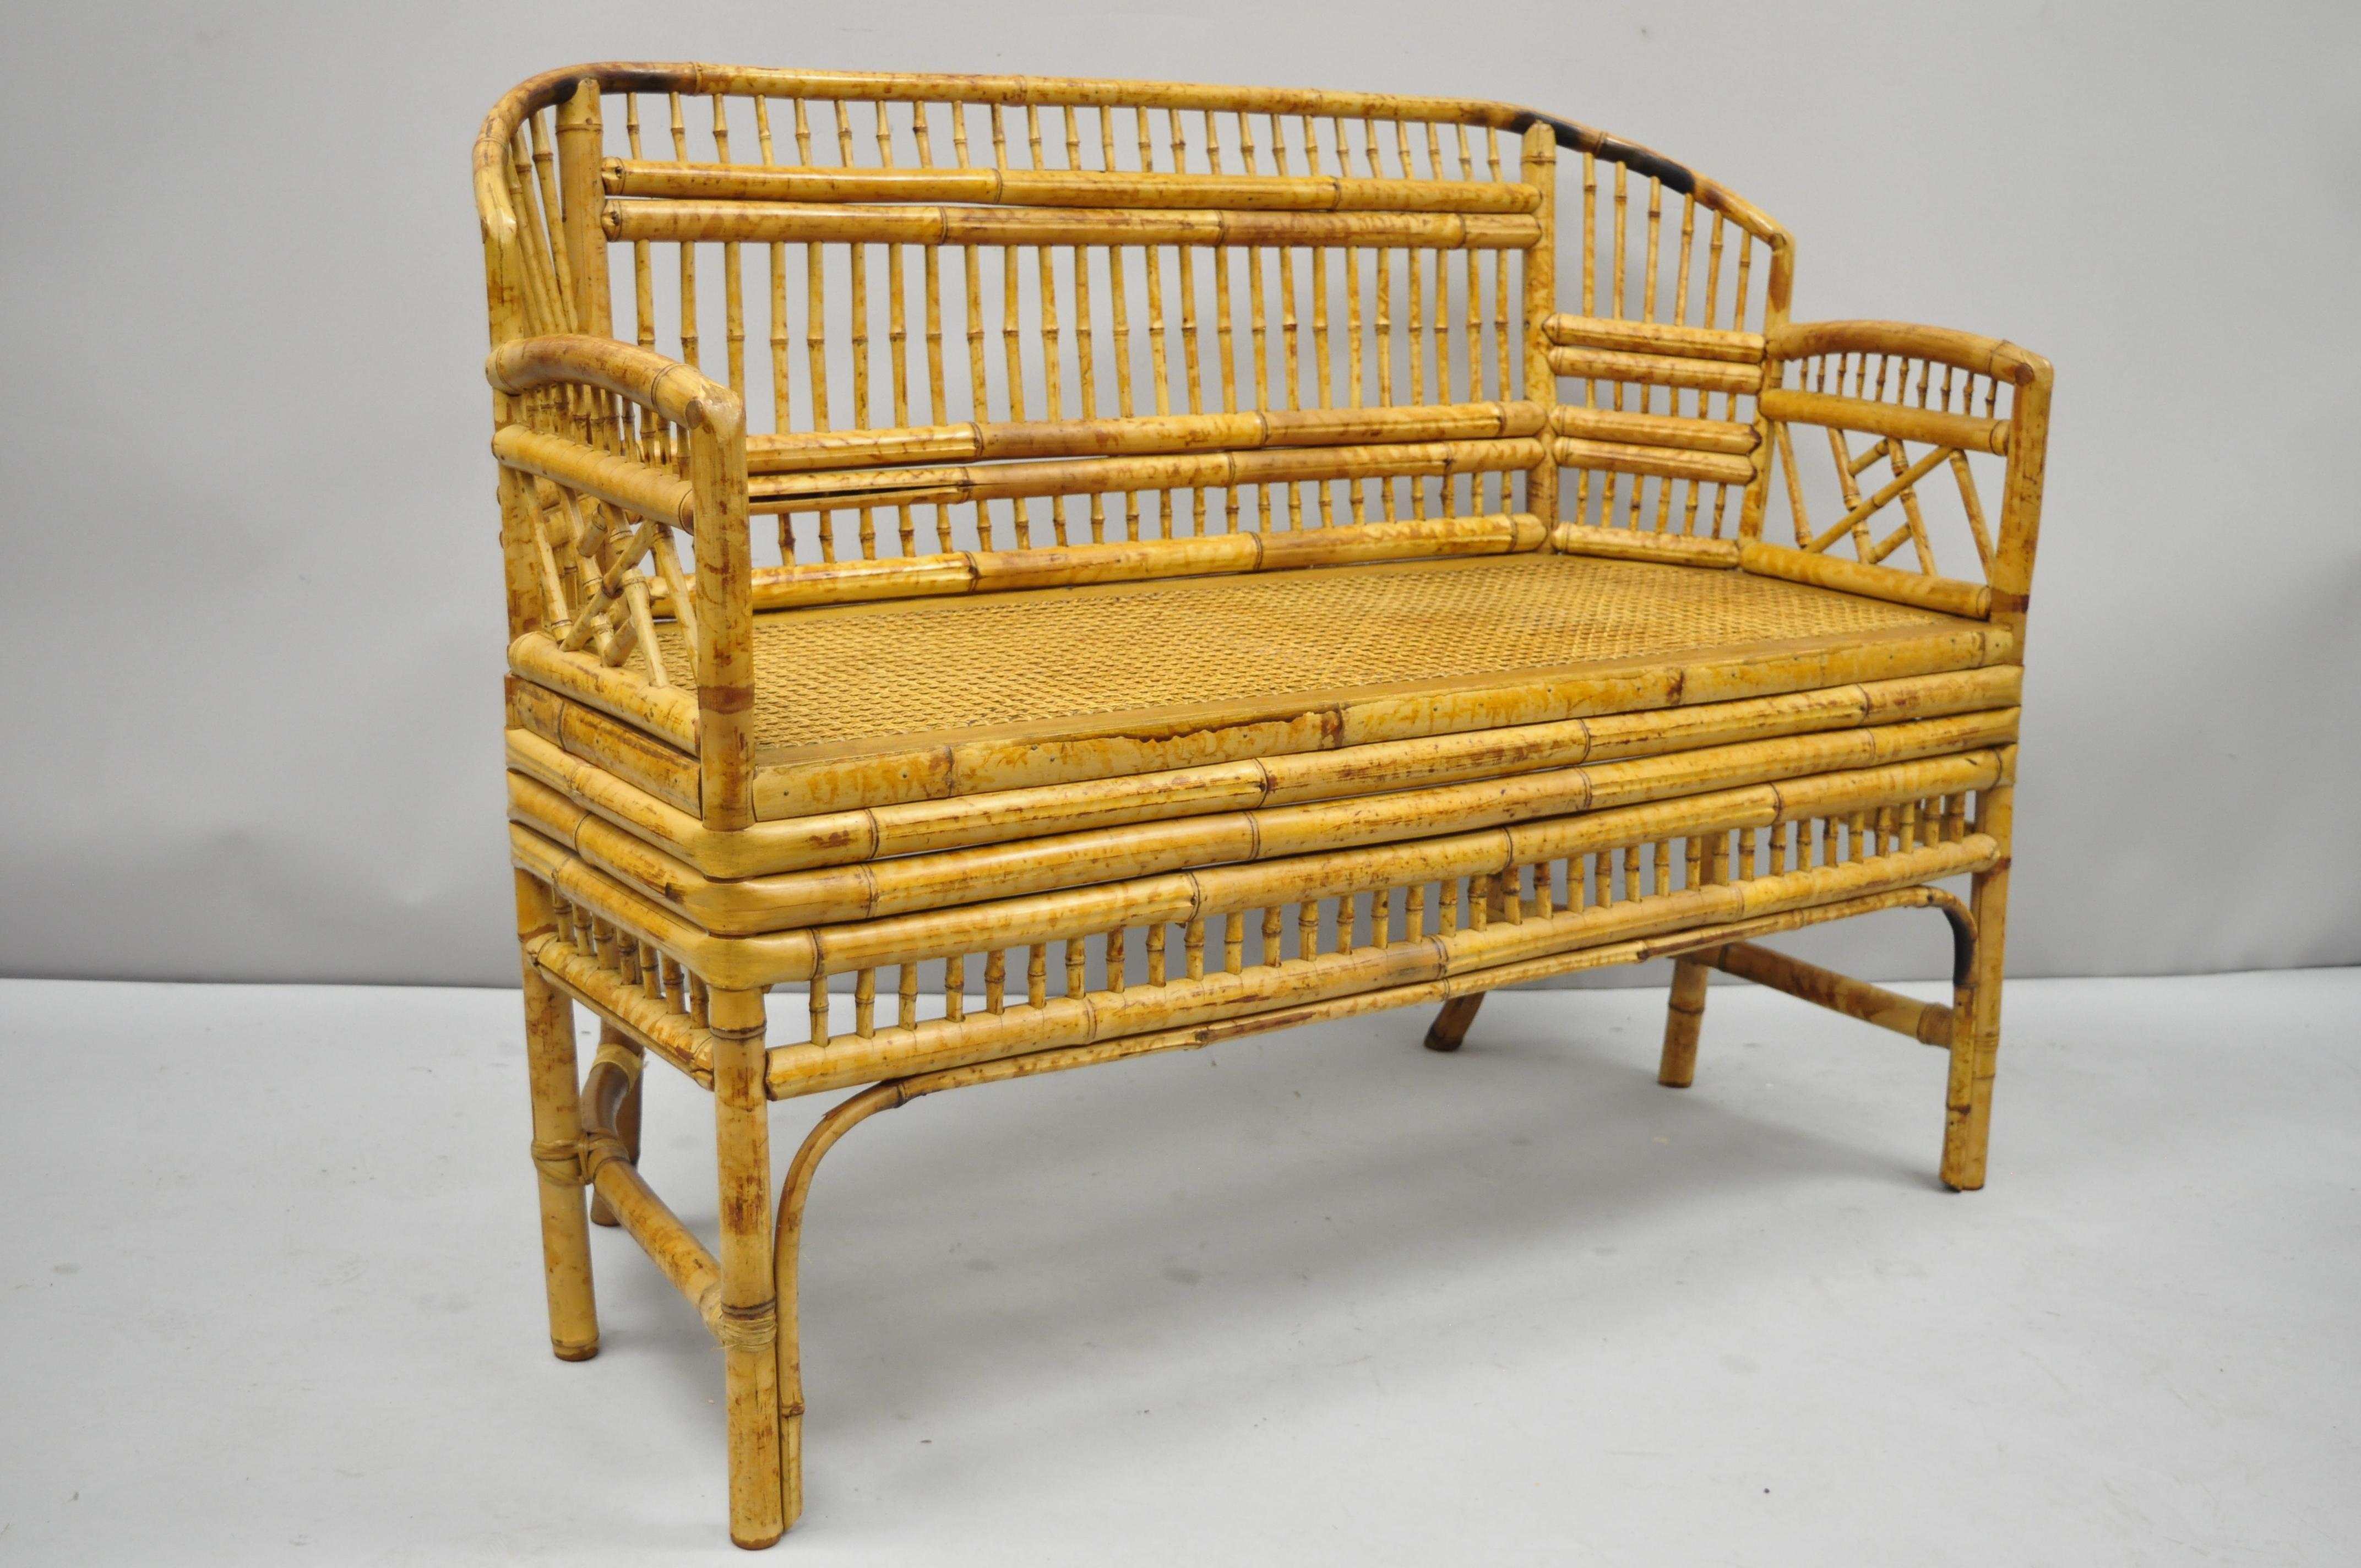 Vintage Brighton Pavilion style bamboo rattan settee Chinese Chippendale. Item features scorched bamboo frame, cane seat, quality craftsmanship, great style and form, circa mid-late 20th century. Measurements: 34